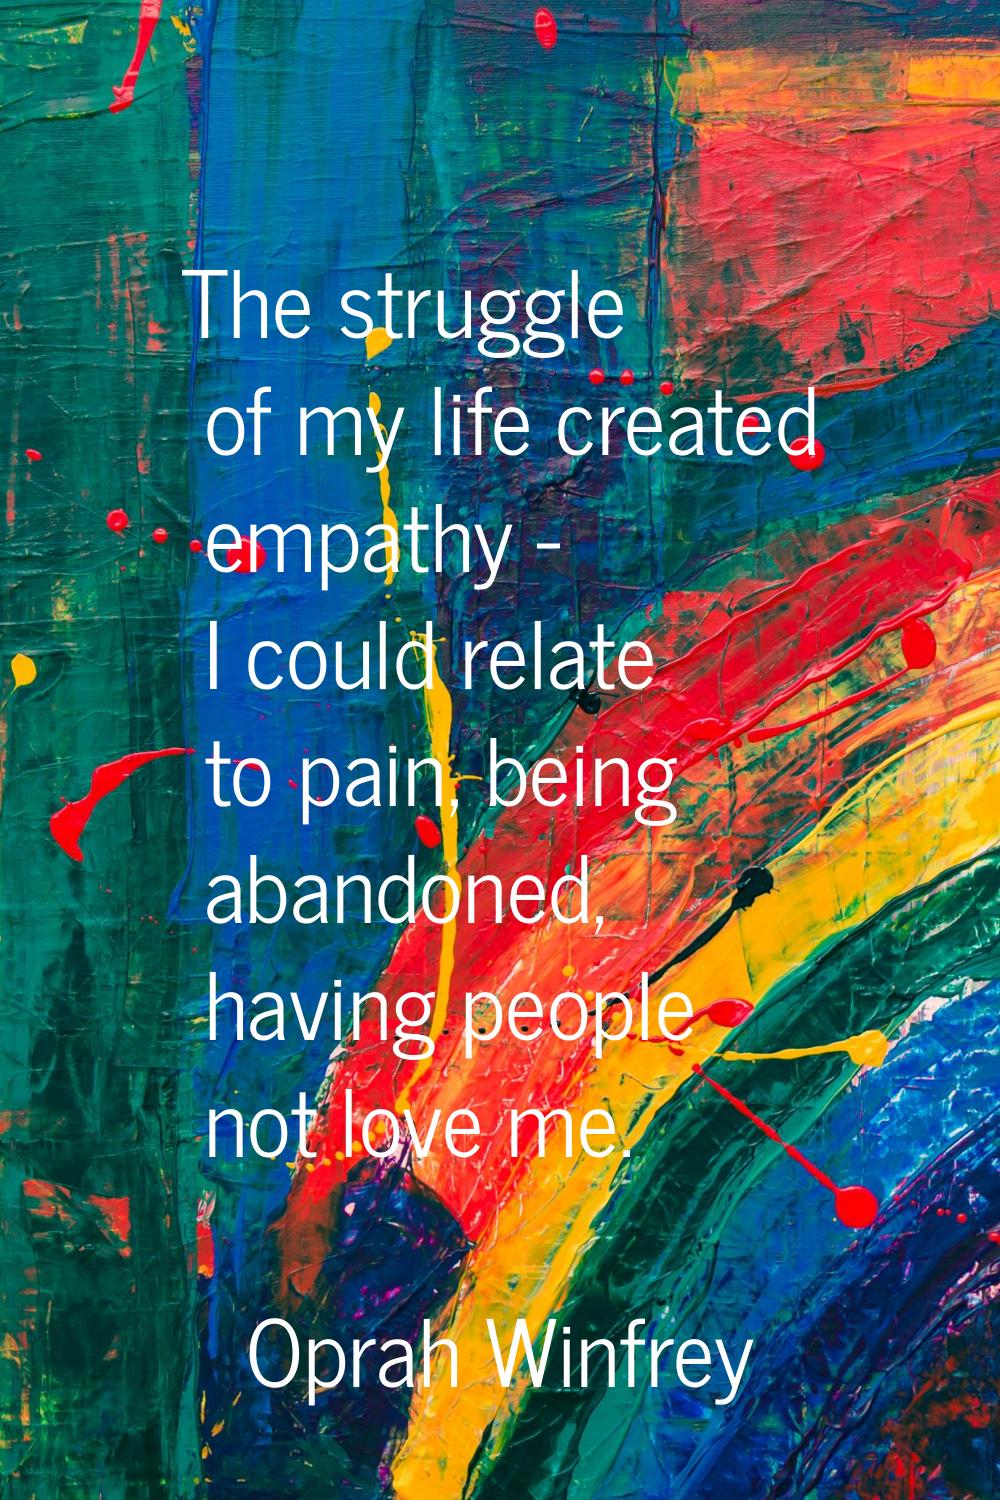 The struggle of my life created empathy - I could relate to pain, being abandoned, having people no